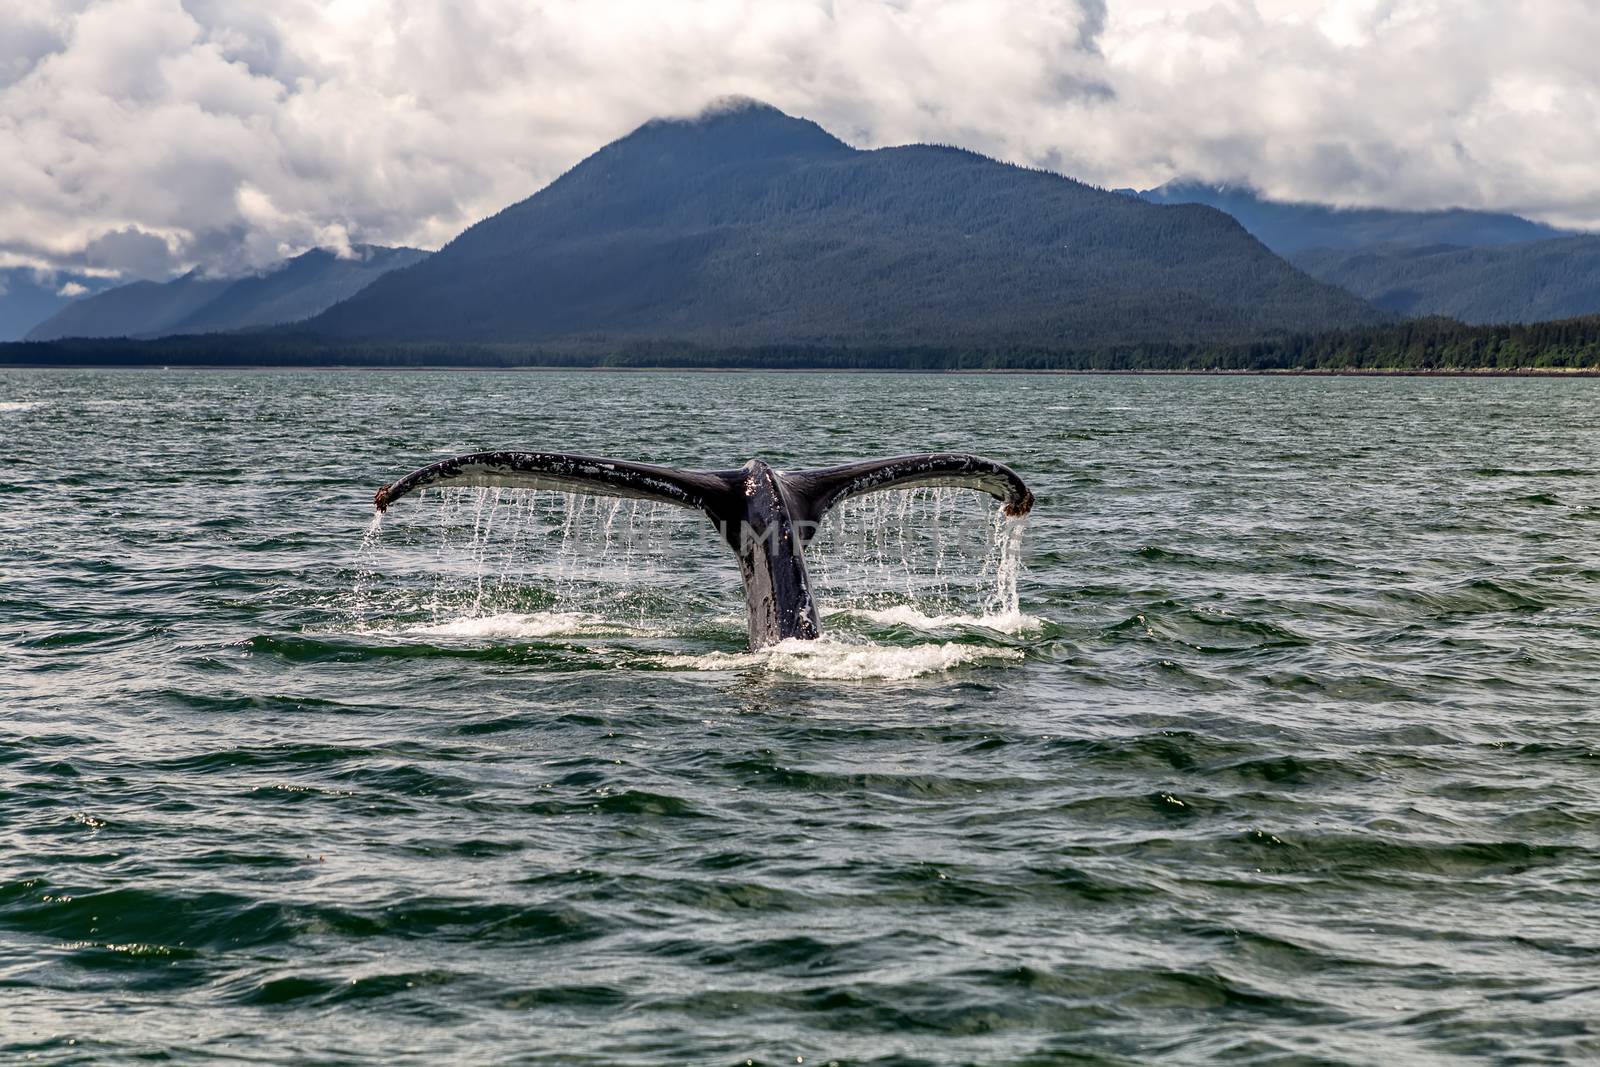 Whale's fin rising out of the water in Alaska